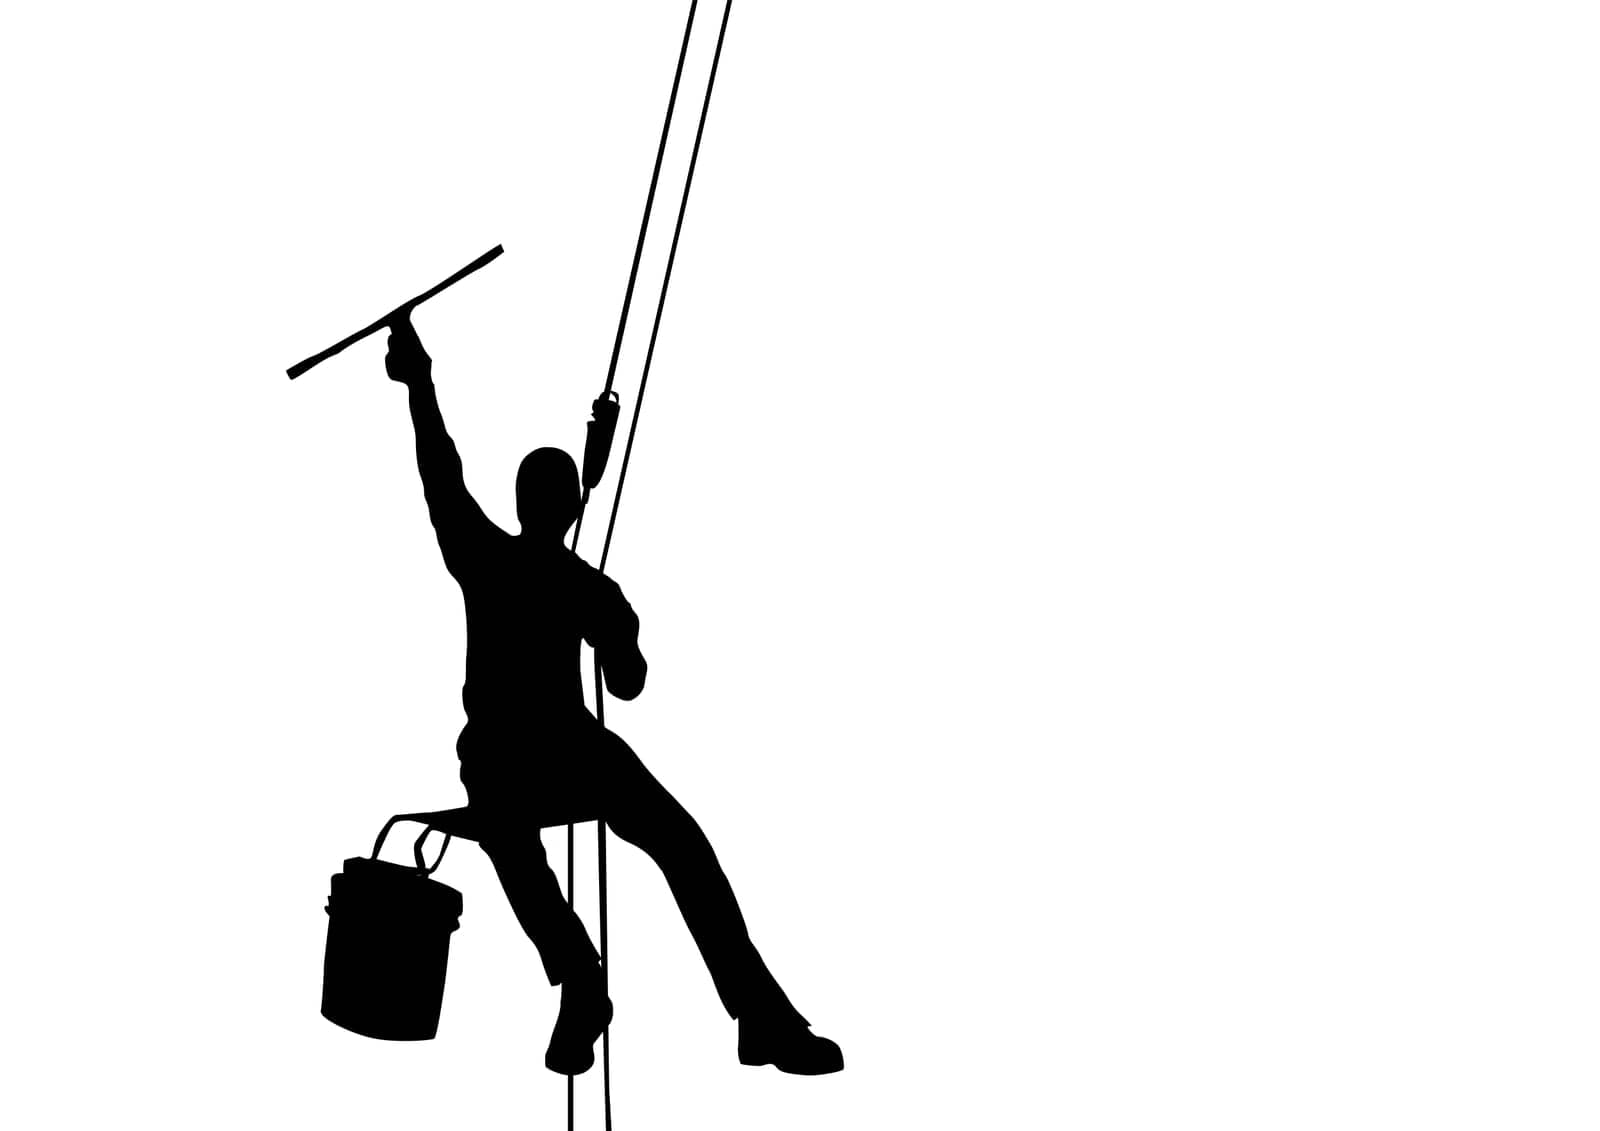 Window washer silhouette, vector illustration over white